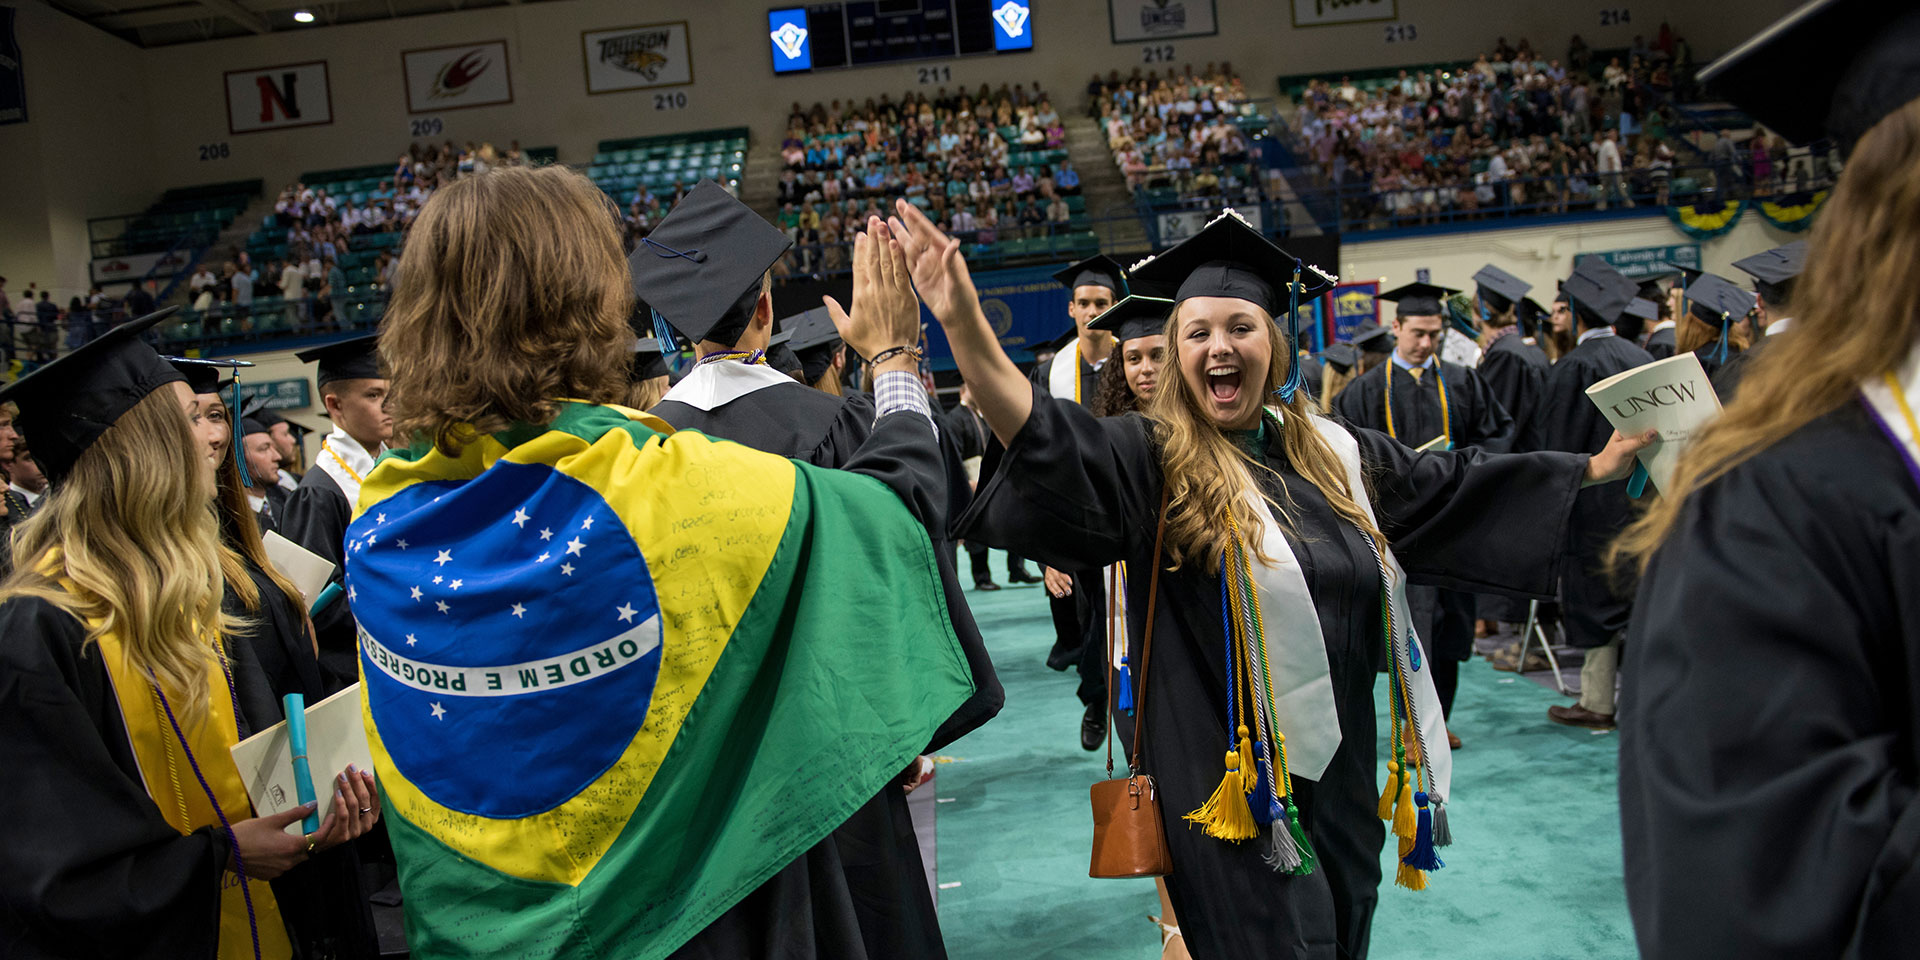 During commencement, a student wrapped in the Brazil flag gives someone a high five